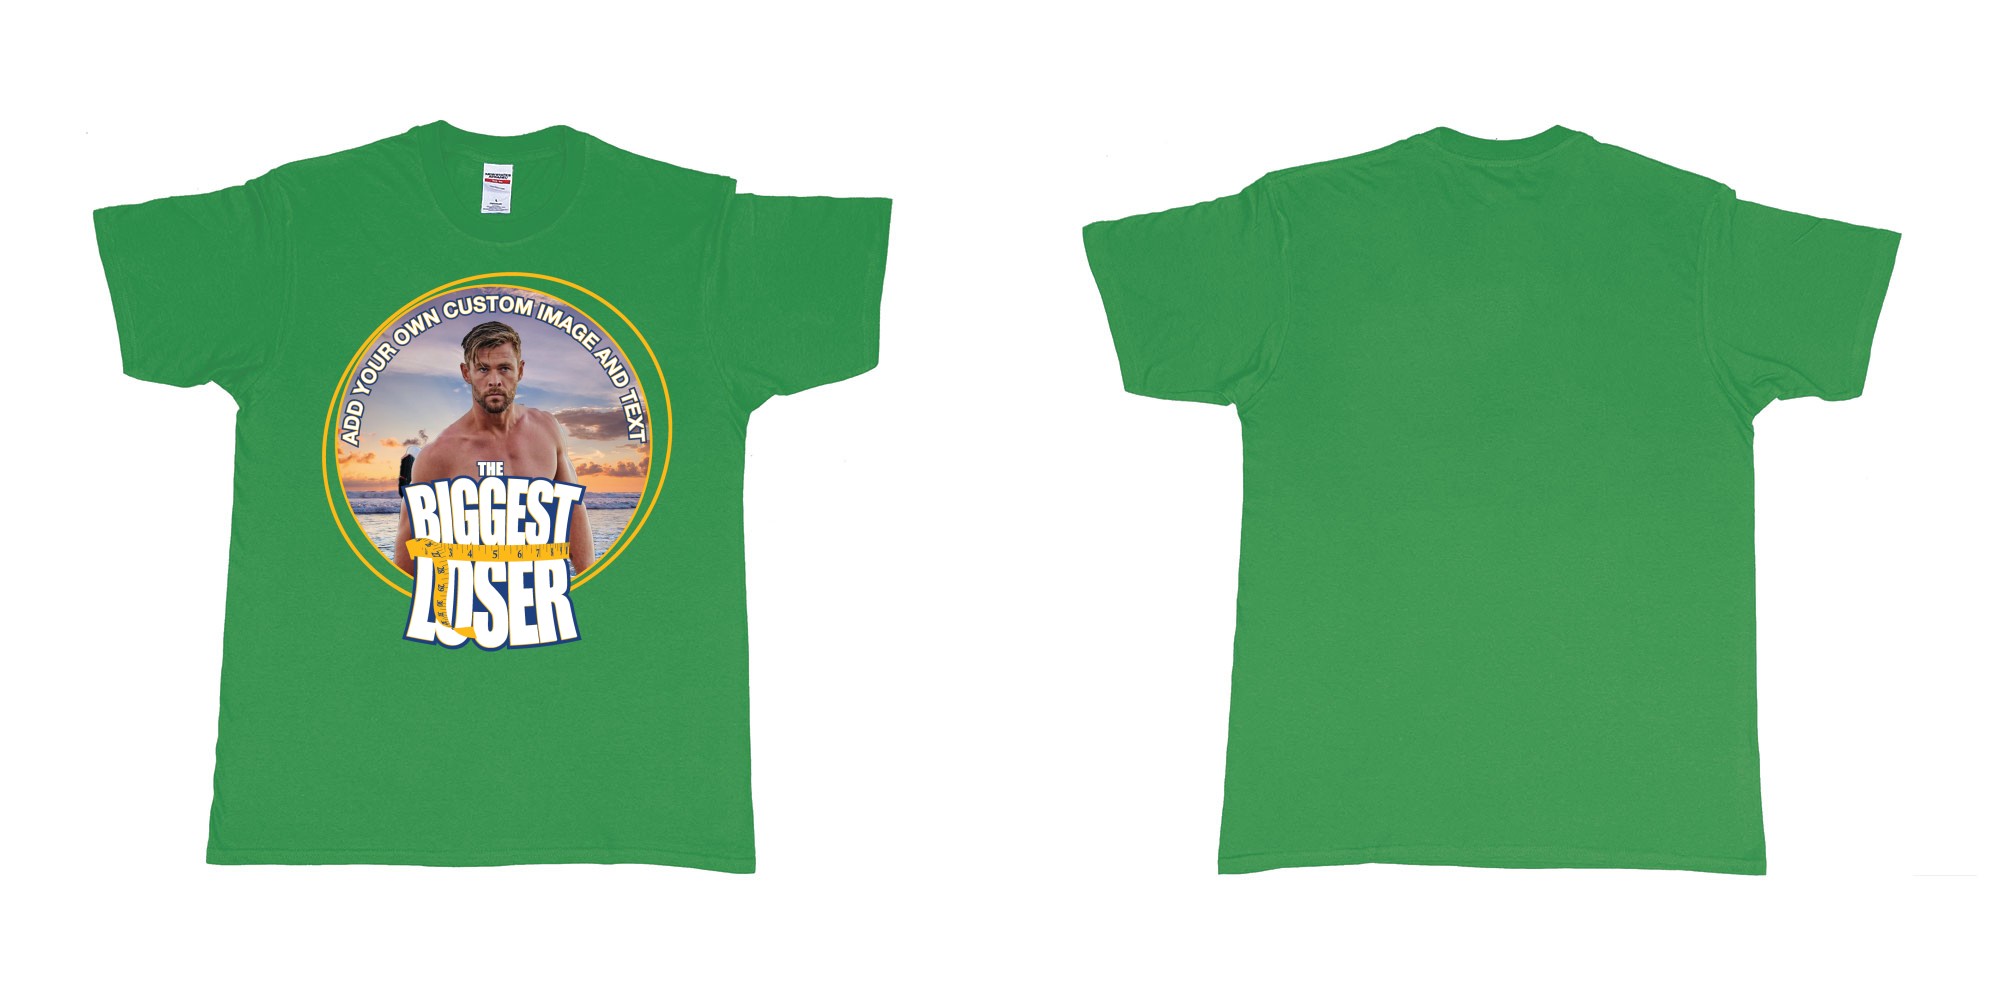 Custom tshirt design the biggest loser logo custom image funny tshirt design in fabric color irish-green choice your own text made in Bali by The Pirate Way